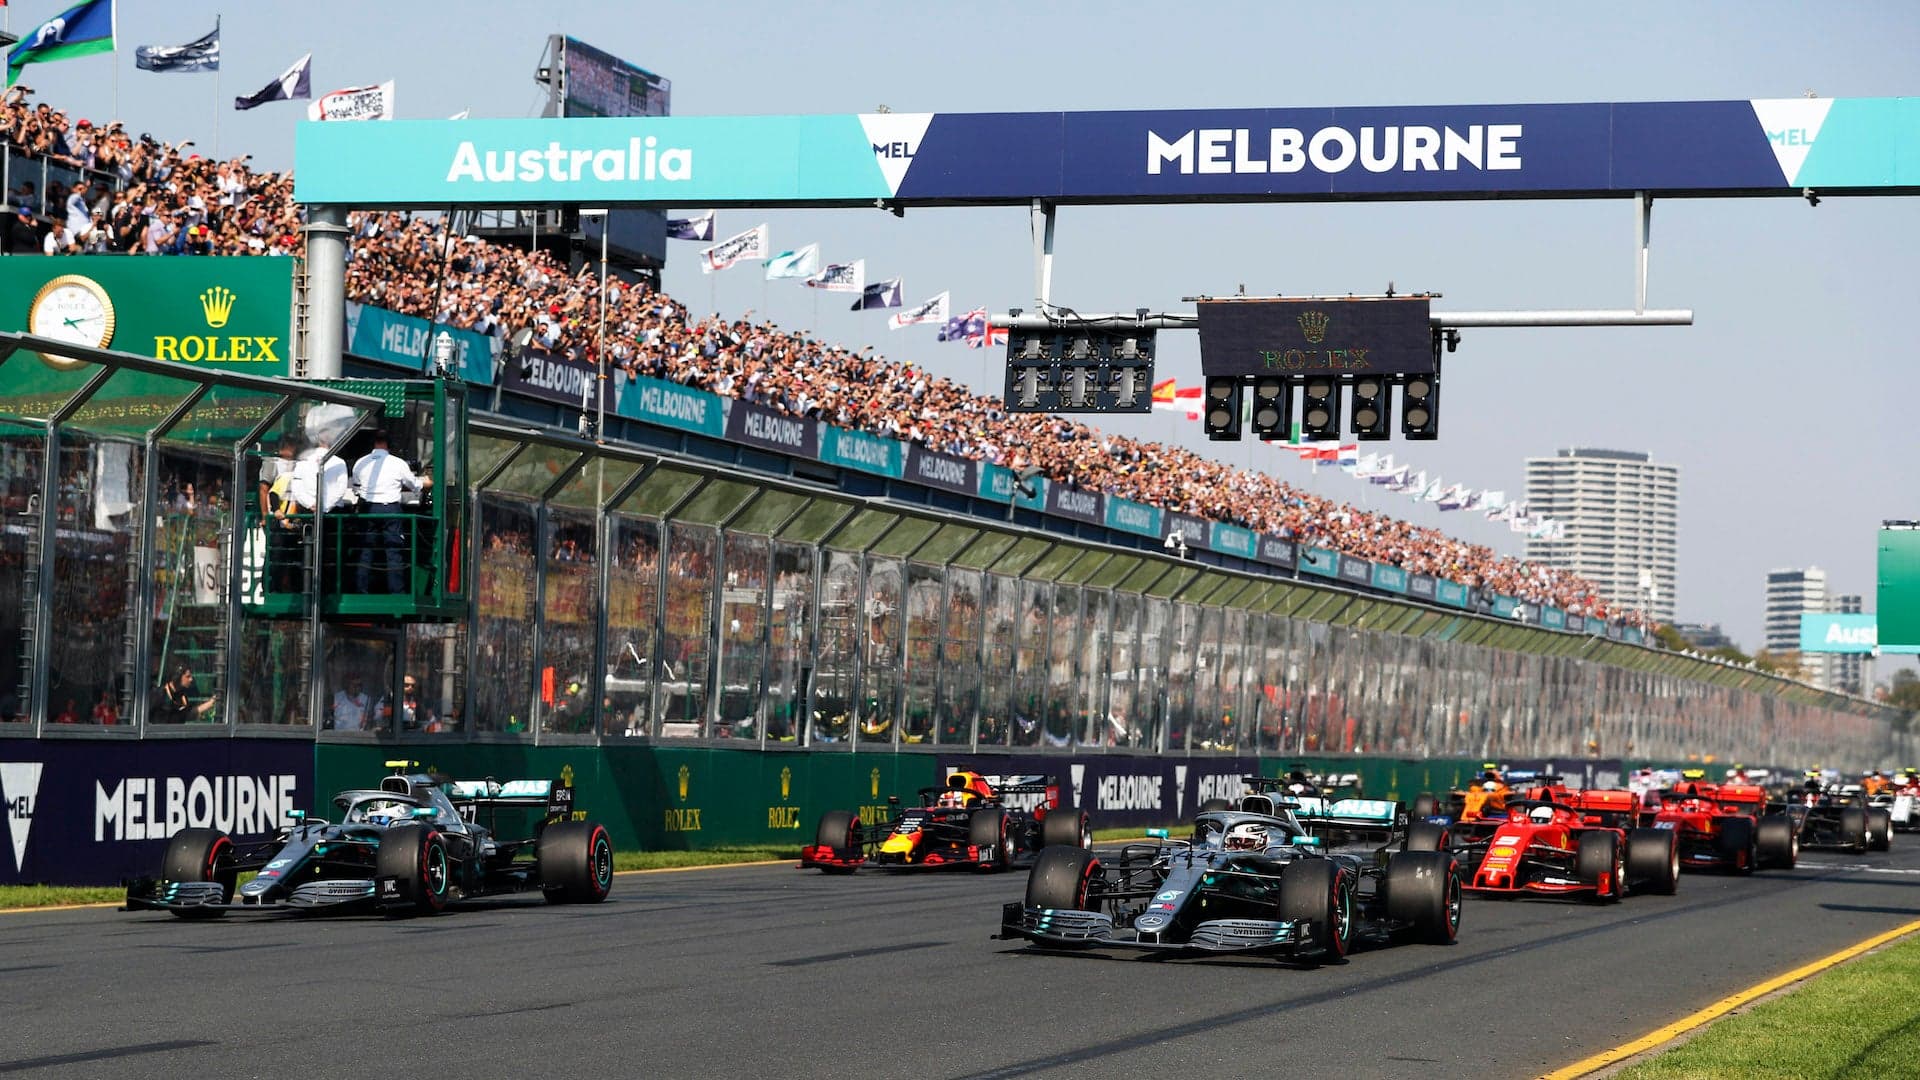 2021 Formula 1 Schedule Returns to Normal With 23-Race Season Starting in March